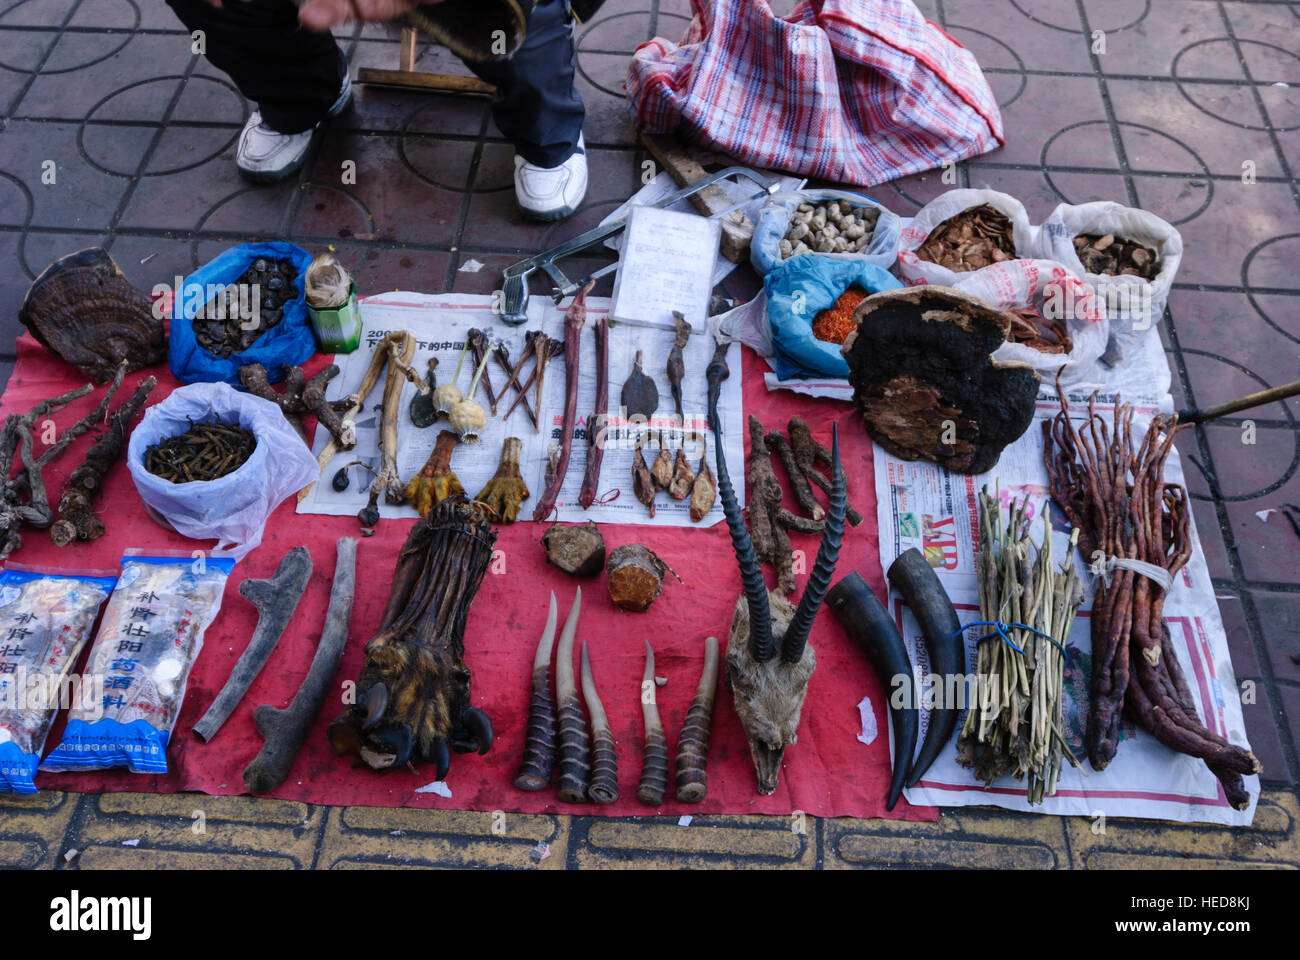 Lanzhou: Sale of parts of protected animals (bear paws and other) by Tibetan traders, Gansu, China Stock Photo